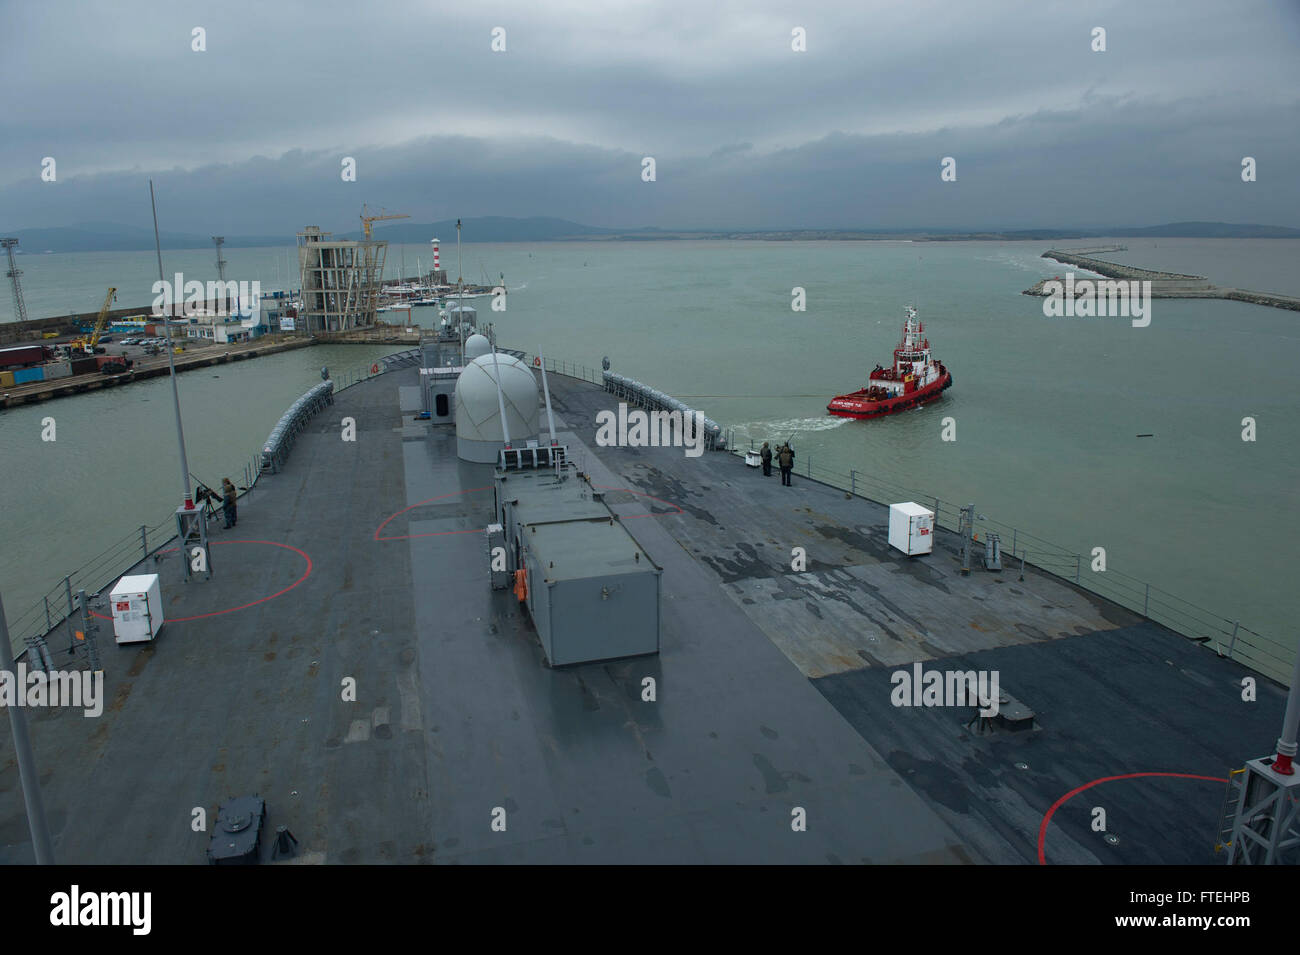 BURGAS, Bulgaria (Oct. 27, 2014) - The U.S. 6th Fleet command and control ship USS Mount Whitney (LCC 20) departs Burgas. Mount Whitney is conducting naval operations with allies and regional partners in the U.S. 6th Fleet area of operations in order to advance security and stability in Europe. Stock Photo